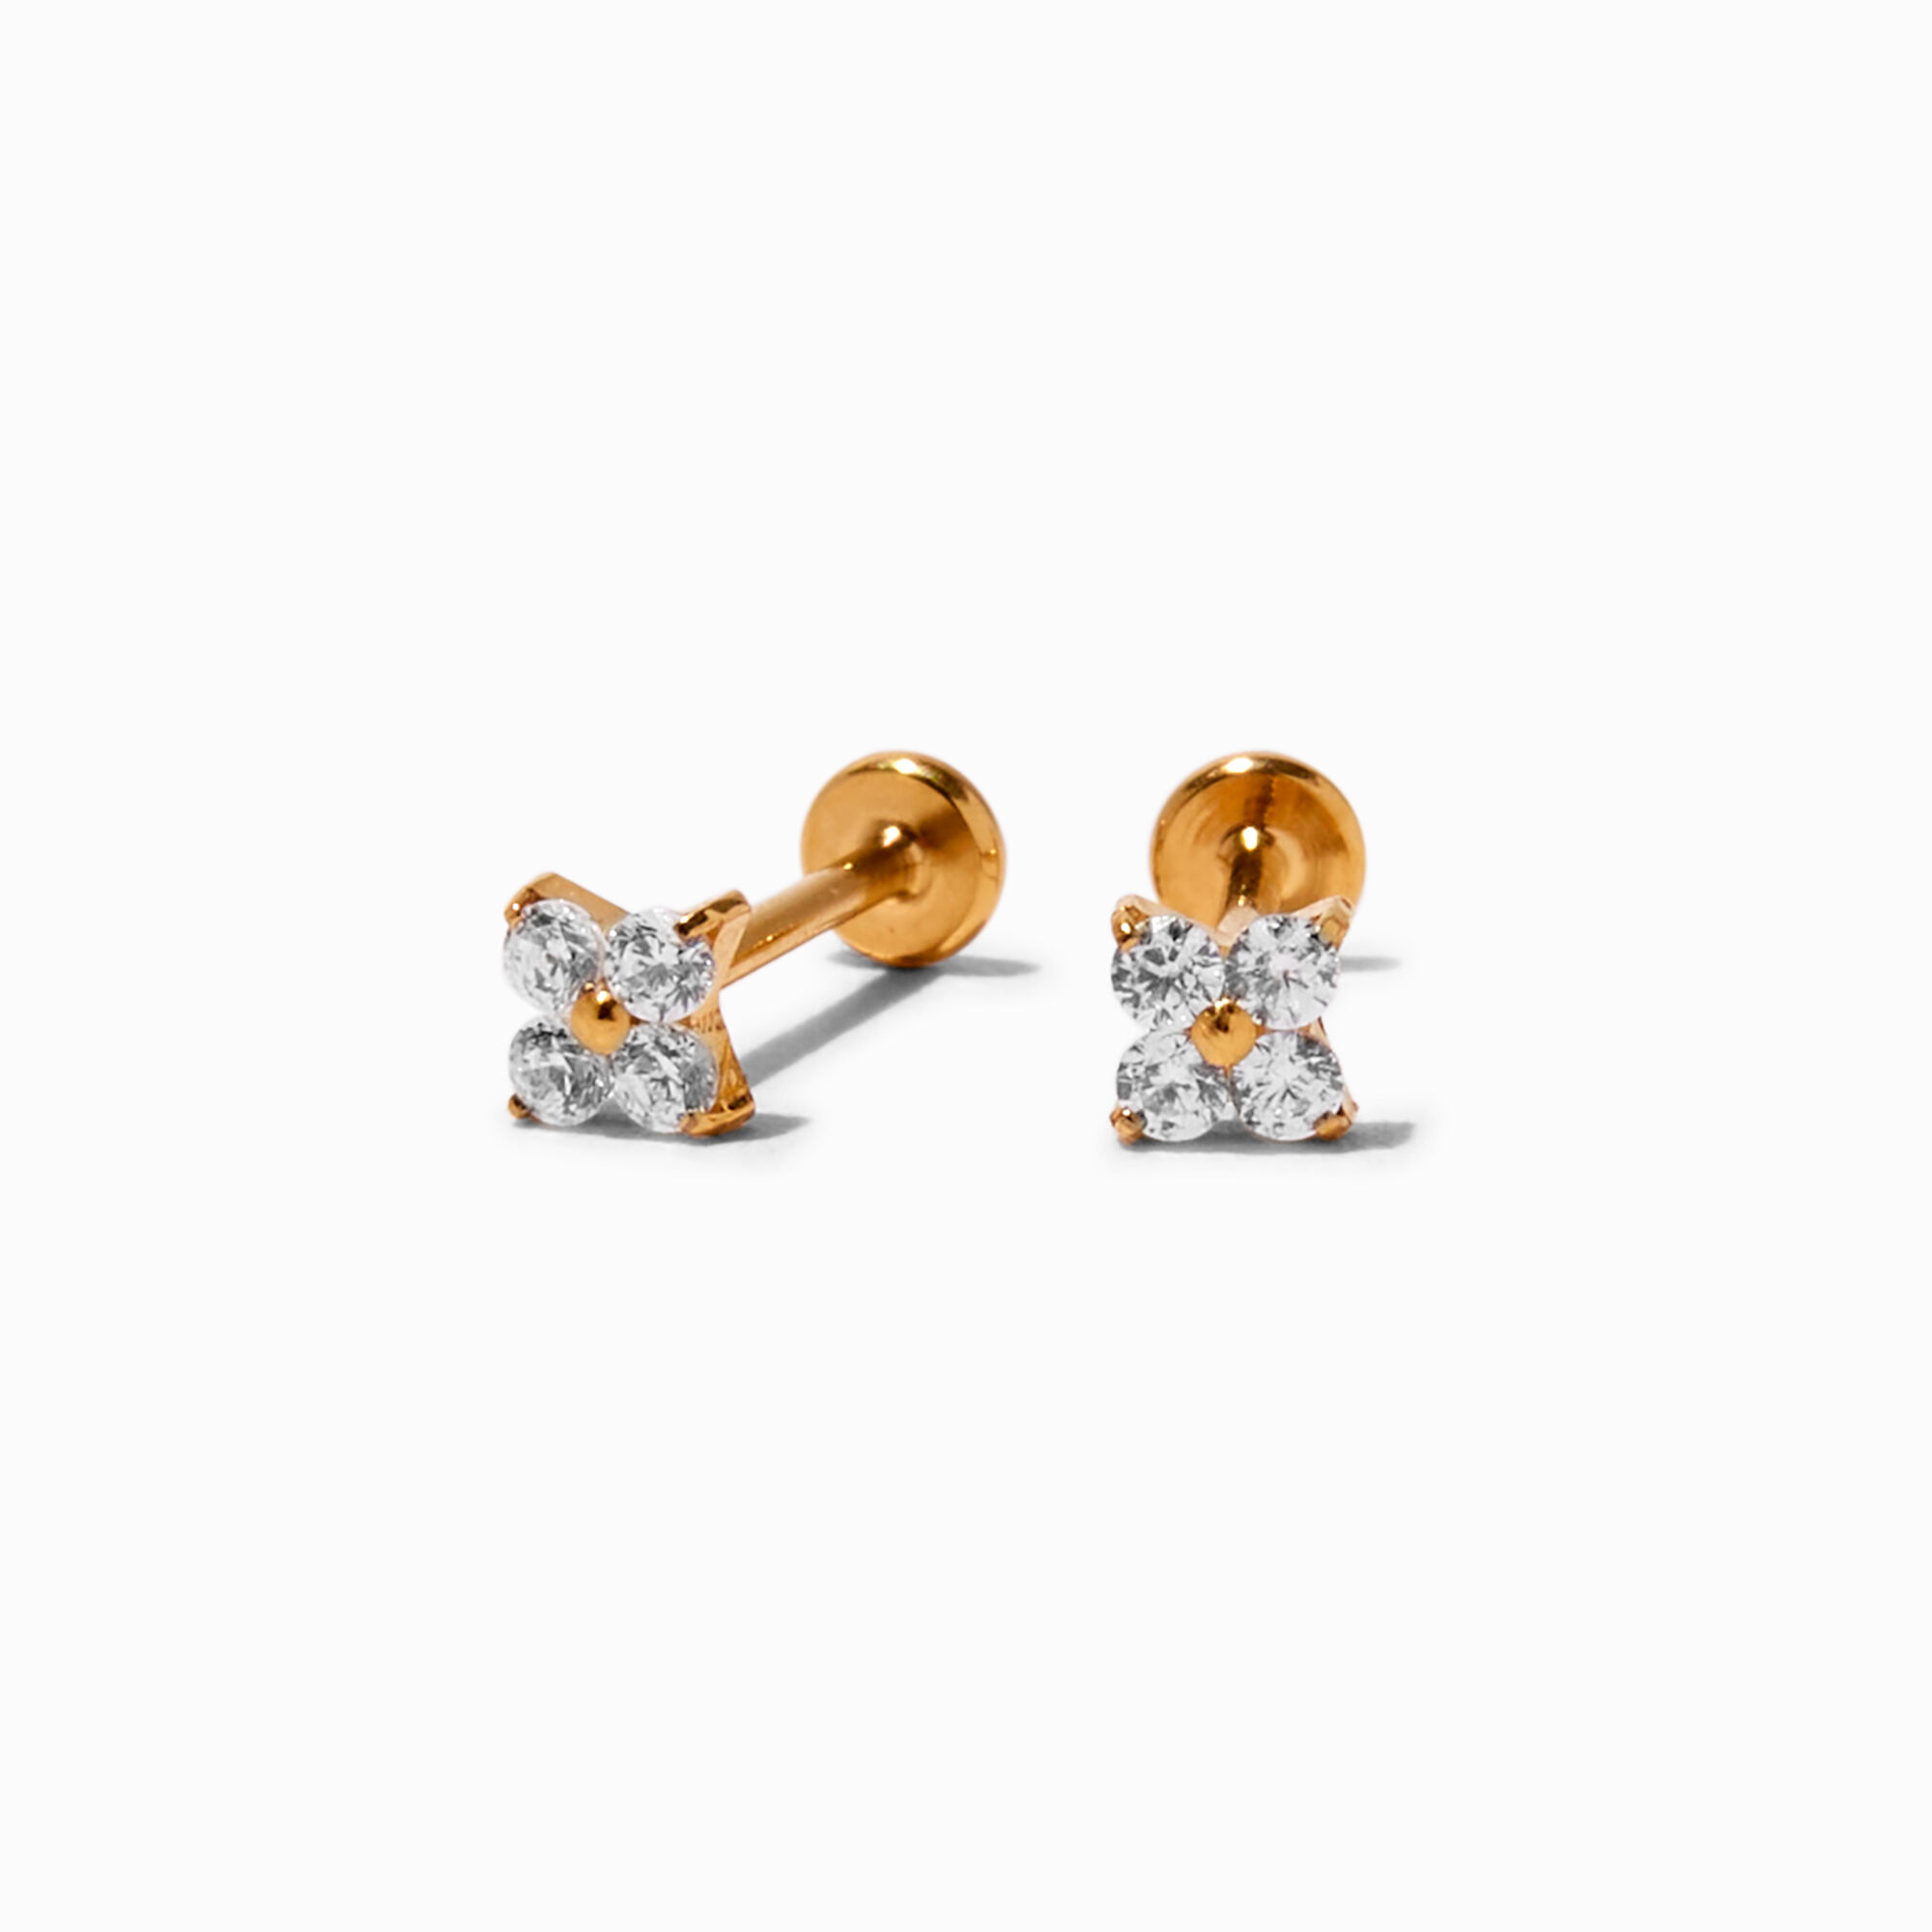 PC Jeweller The Anne-Claire 18KT Yellow Gold & Diamond Earring : Amazon.in:  Fashion